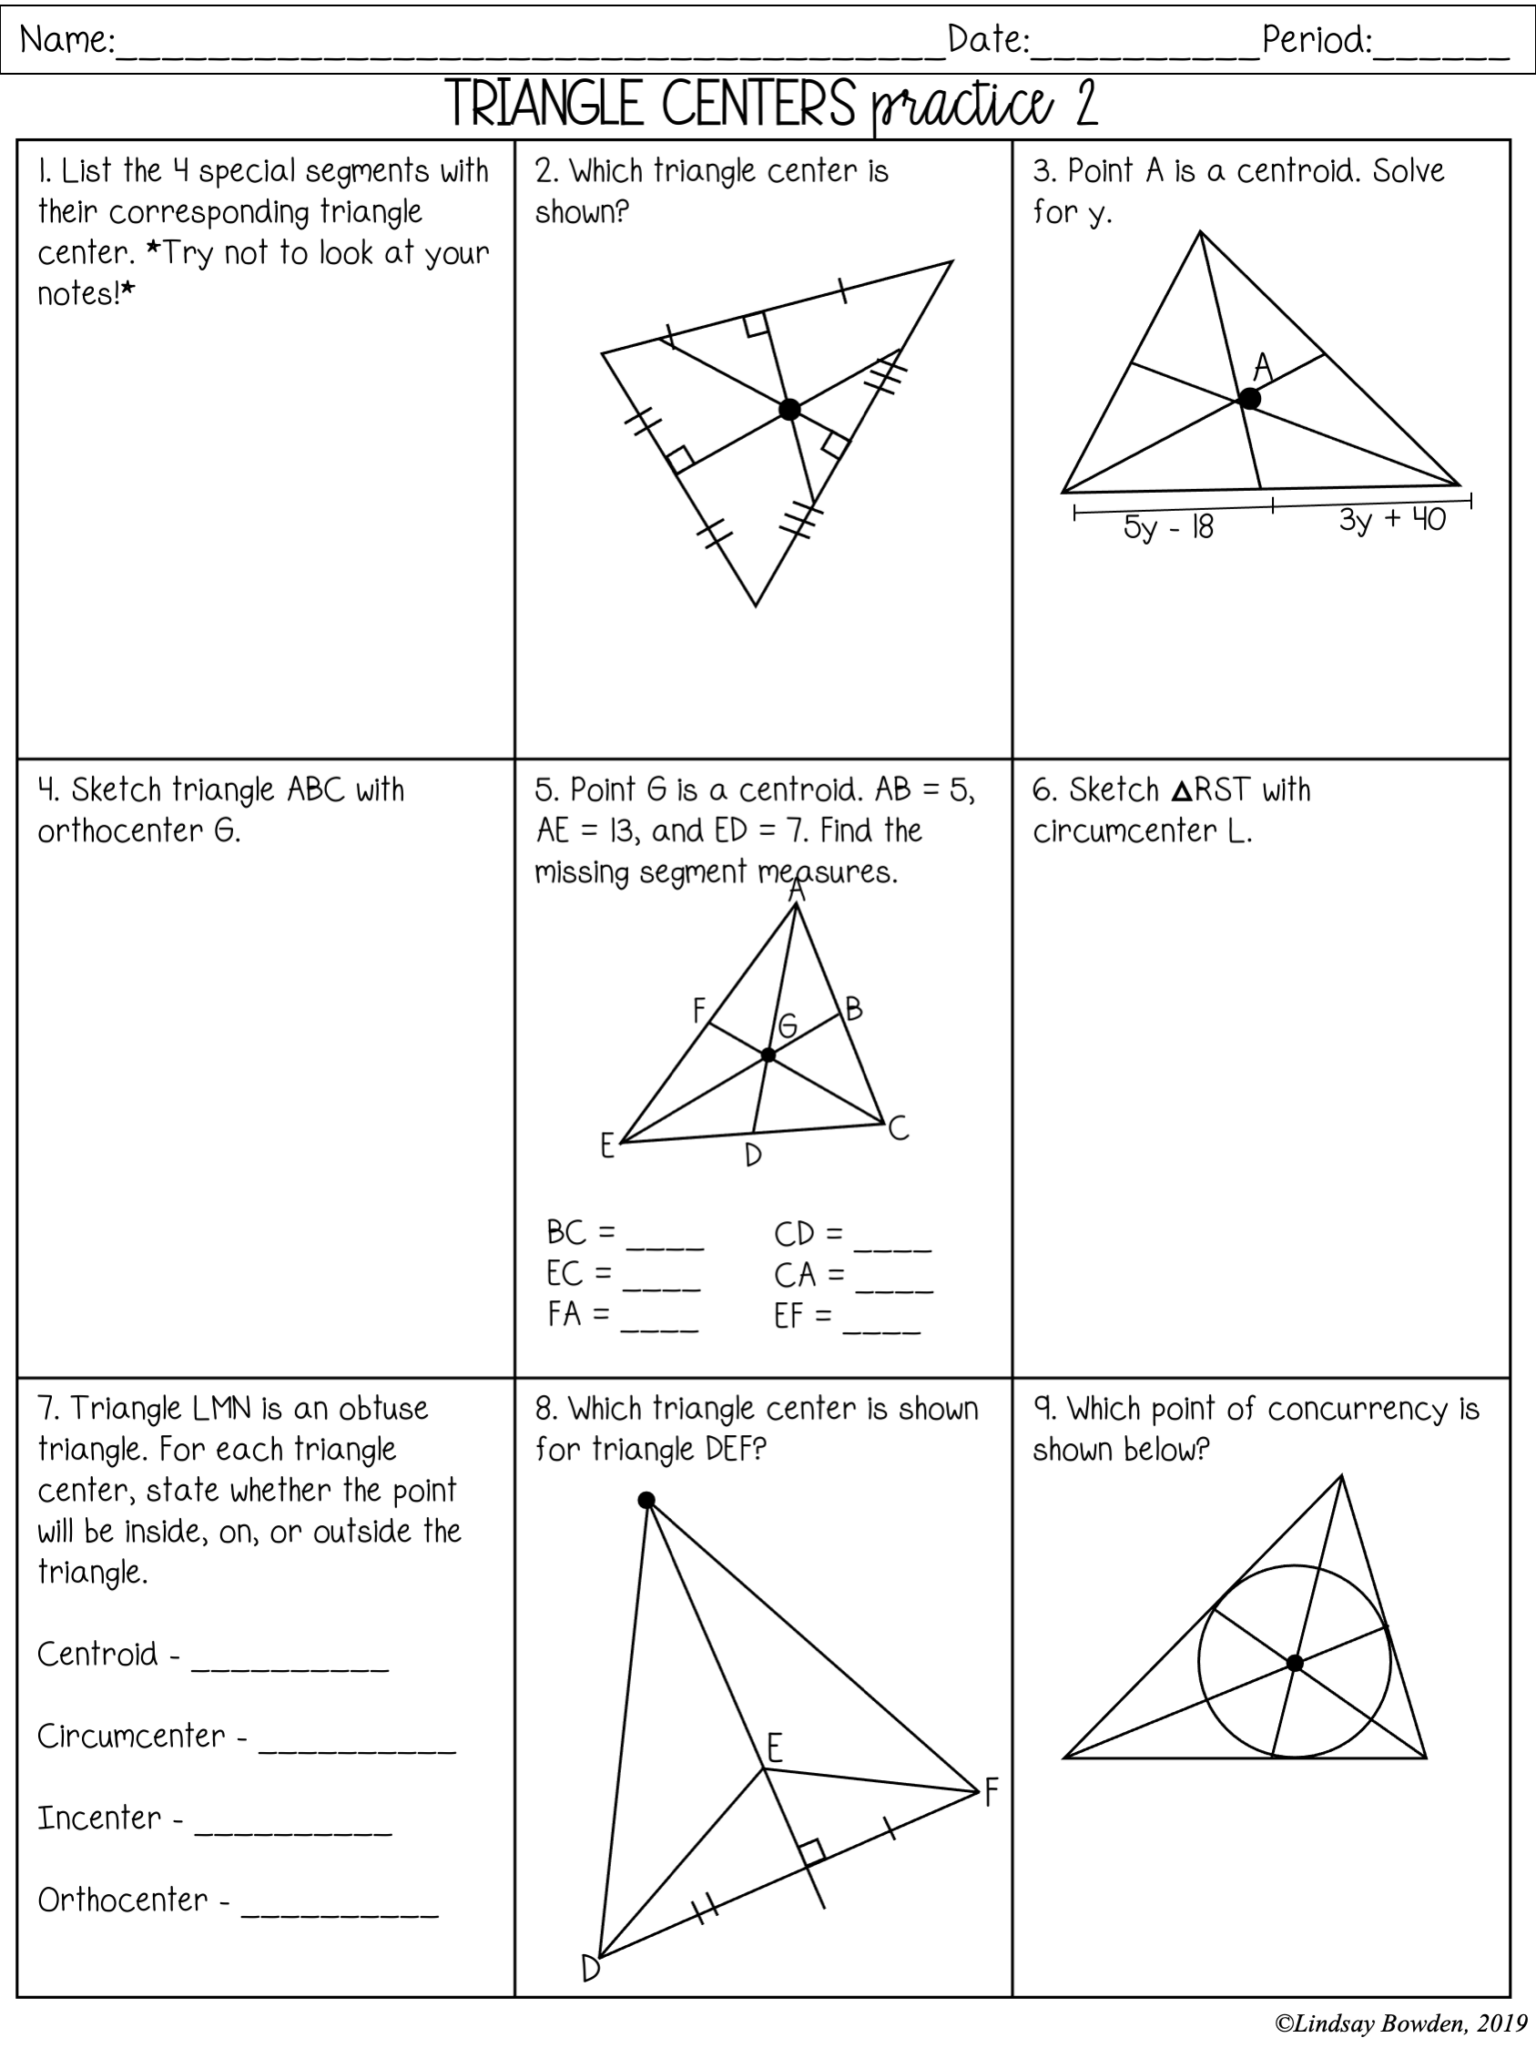 Triangle Centers Notes and Worksheets Lindsay Bowden